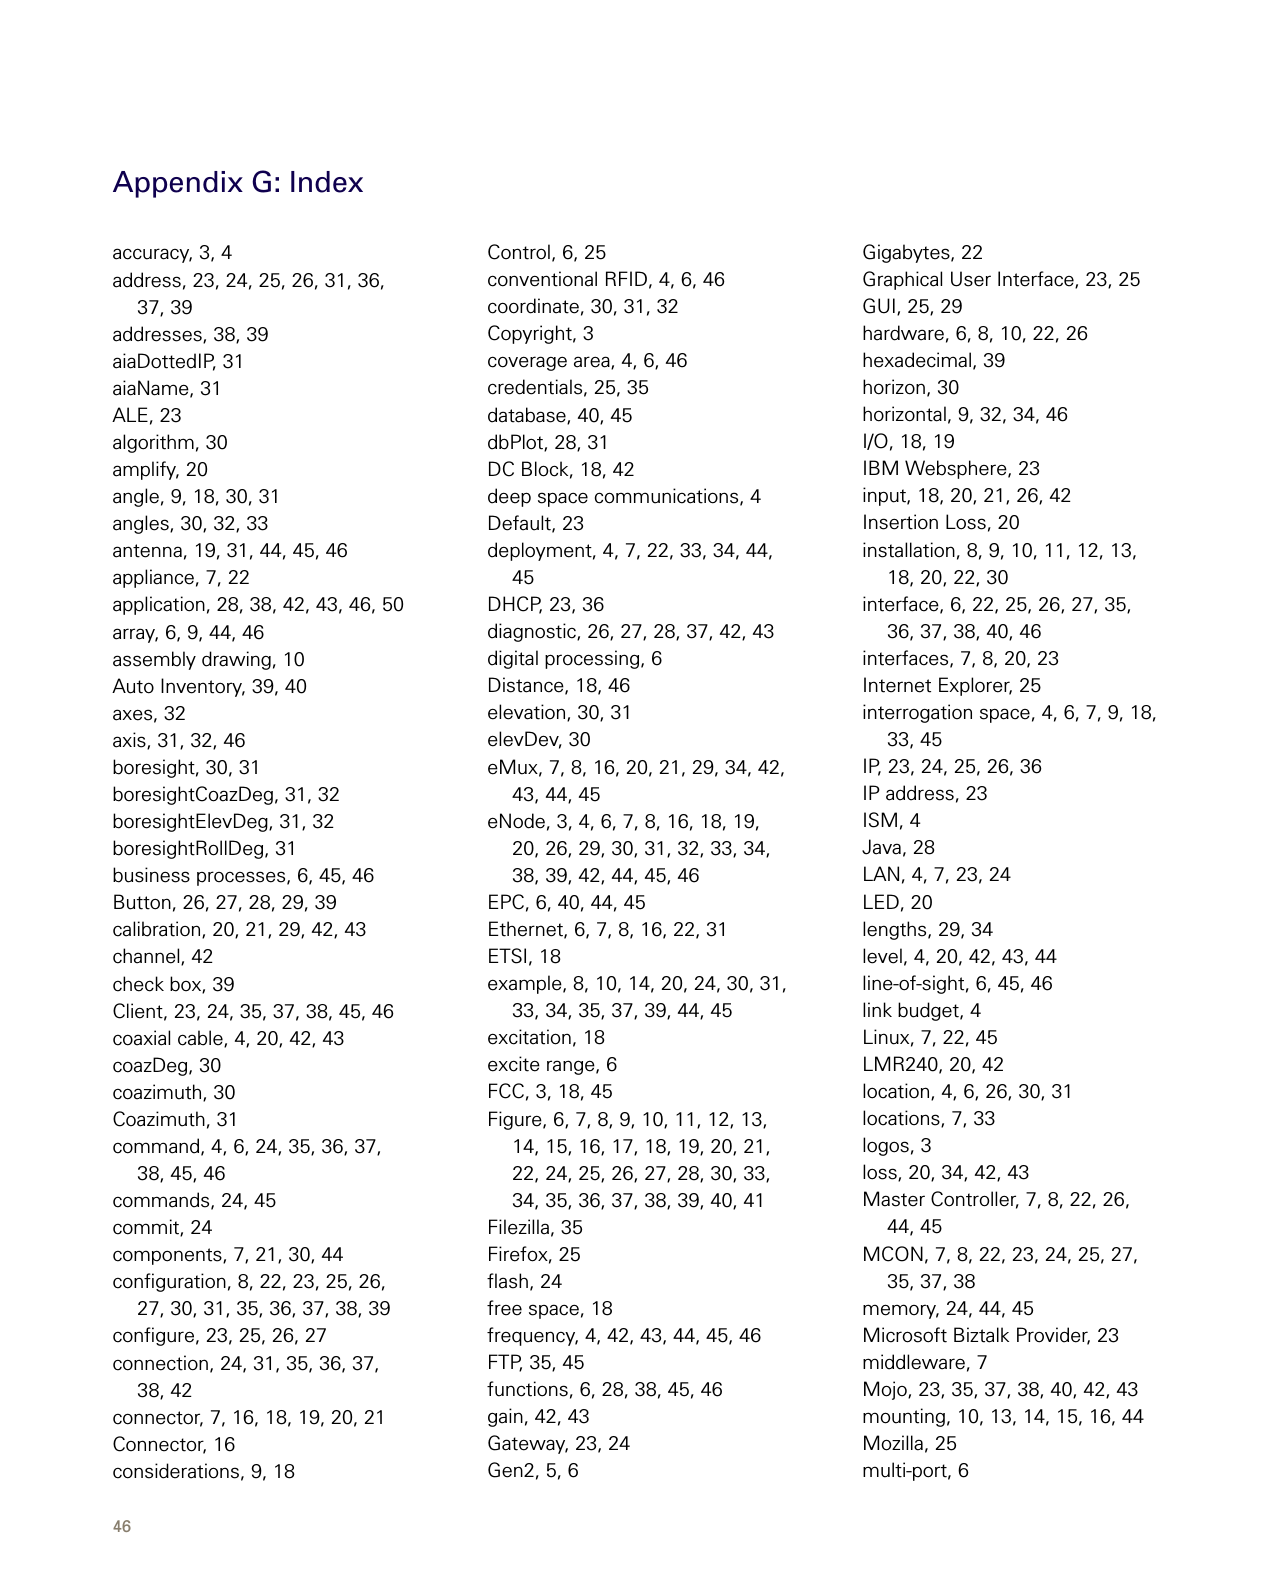 46Appendix G: Indexaccuracy, 3, 4address, 23, 24, 25, 26, 31, 36, 37, 39addresses, 38, 39aiaDottedIP, 31aiaName, 31ALE, 23algorithm, 30amplify, 20angle, 9, 18, 30, 31angles, 30, 32, 33antenna, 19, 31, 44, 45, 46appliance, 7, 22application, 28, 38, 42, 43, 46, 50array, 6, 9, 44, 46assembly drawing, 10Auto Inventory, 39, 40axes, 32axis, 31, 32, 46boresight, 30, 31boresightCoazDeg, 31, 32boresightElevDeg, 31, 32boresightRollDeg, 31business processes, 6, 45, 46Button, 26, 27, 28, 29, 39calibration, 20, 21, 29, 42, 43channel, 42check box, 39Client, 23, 24, 35, 37, 38, 45, 46coaxial cable, 4, 20, 42, 43coazDeg, 30coazimuth, 30Coazimuth, 31command, 4, 6, 24, 35, 36, 37, 38, 45, 46commands, 24, 45commit, 24components, 7, 21, 30, 44conﬁguration, 8, 22, 23, 25, 26, 27, 30, 31, 35, 36, 37, 38, 39conﬁgure, 23, 25, 26, 27connection, 24, 31, 35, 36, 37, 38, 42connector, 7, 16, 18, 19, 20, 21Connector, 16considerations, 9, 18Control, 6, 25conventional RFID, 4, 6, 46coordinate, 30, 31, 32Copyright, 3coverage area, 4, 6, 46credentials, 25, 35database, 40, 45dbPlot, 28, 31DC Block, 18, 42deep space communications, 4Default, 23deployment, 4, 7, 22, 33, 34, 44, 45DHCP, 23, 36diagnostic, 26, 27, 28, 37, 42, 43digital processing, 6Distance, 18, 46elevation, 30, 31elevDev, 30eMux, 7, 8, 16, 20, 21, 29, 34, 42, 43, 44, 45eNode, 3, 4, 6, 7, 8, 16, 18, 19, 20, 26, 29, 30, 31, 32, 33, 34, 38, 39, 42, 44, 45, 46EPC, 6, 40, 44, 45Ethernet, 6, 7, 8, 16, 22, 31ETSI, 18example, 8, 10, 14, 20, 24, 30, 31, 33, 34, 35, 37, 39, 44, 45excitation, 18excite range, 6FCC, 3, 18, 45Figure, 6, 7, 8, 9, 10, 11, 12, 13, 14, 15, 16, 17, 18, 19, 20, 21, 22, 24, 25, 26, 27, 28, 30, 33, 34, 35, 36, 37, 38, 39, 40, 41Filezilla, 35Firefox, 25ﬂash, 24free space, 18frequency, 4, 42, 43, 44, 45, 46FTP, 35, 45functions, 6, 28, 38, 45, 46gain, 42, 43Gateway, 23, 24Gen2, 5, 6Gigabytes, 22Graphical User Interface, 23, 25GUI, 25, 29hardware, 6, 8, 10, 22, 26hexadecimal, 39horizon, 30horizontal, 9, 32, 34, 46I/O, 18, 19IBM Websphere, 23input, 18, 20, 21, 26, 42Insertion Loss, 20installation, 8, 9, 10, 11, 12, 13, 18, 20, 22, 30interface, 6, 22, 25, 26, 27, 35, 36, 37, 38, 40, 46interfaces, 7, 8, 20, 23Internet Explorer, 25interrogation space, 4, 6, 7, 9, 18, 33, 45IP, 23, 24, 25, 26, 36IP address, 23ISM, 4Java, 28LAN, 4, 7, 23, 24LED, 20lengths, 29, 34level, 4, 20, 42, 43, 44line-of-sight, 6, 45, 46link budget, 4Linux, 7, 22, 45LMR240, 20, 42location, 4, 6, 26, 30, 31locations, 7, 33logos, 3loss, 20, 34, 42, 43Master Controller, 7, 8, 22, 26, 44, 45MCON, 7, 8, 22, 23, 24, 25, 27, 35, 37, 38memory, 24, 44, 45Microsoft Biztalk Provider, 23middleware, 7Mojo, 23, 35, 37, 38, 40, 42, 43mounting, 10, 13, 14, 15, 16, 44Mozilla, 25multi-port, 6